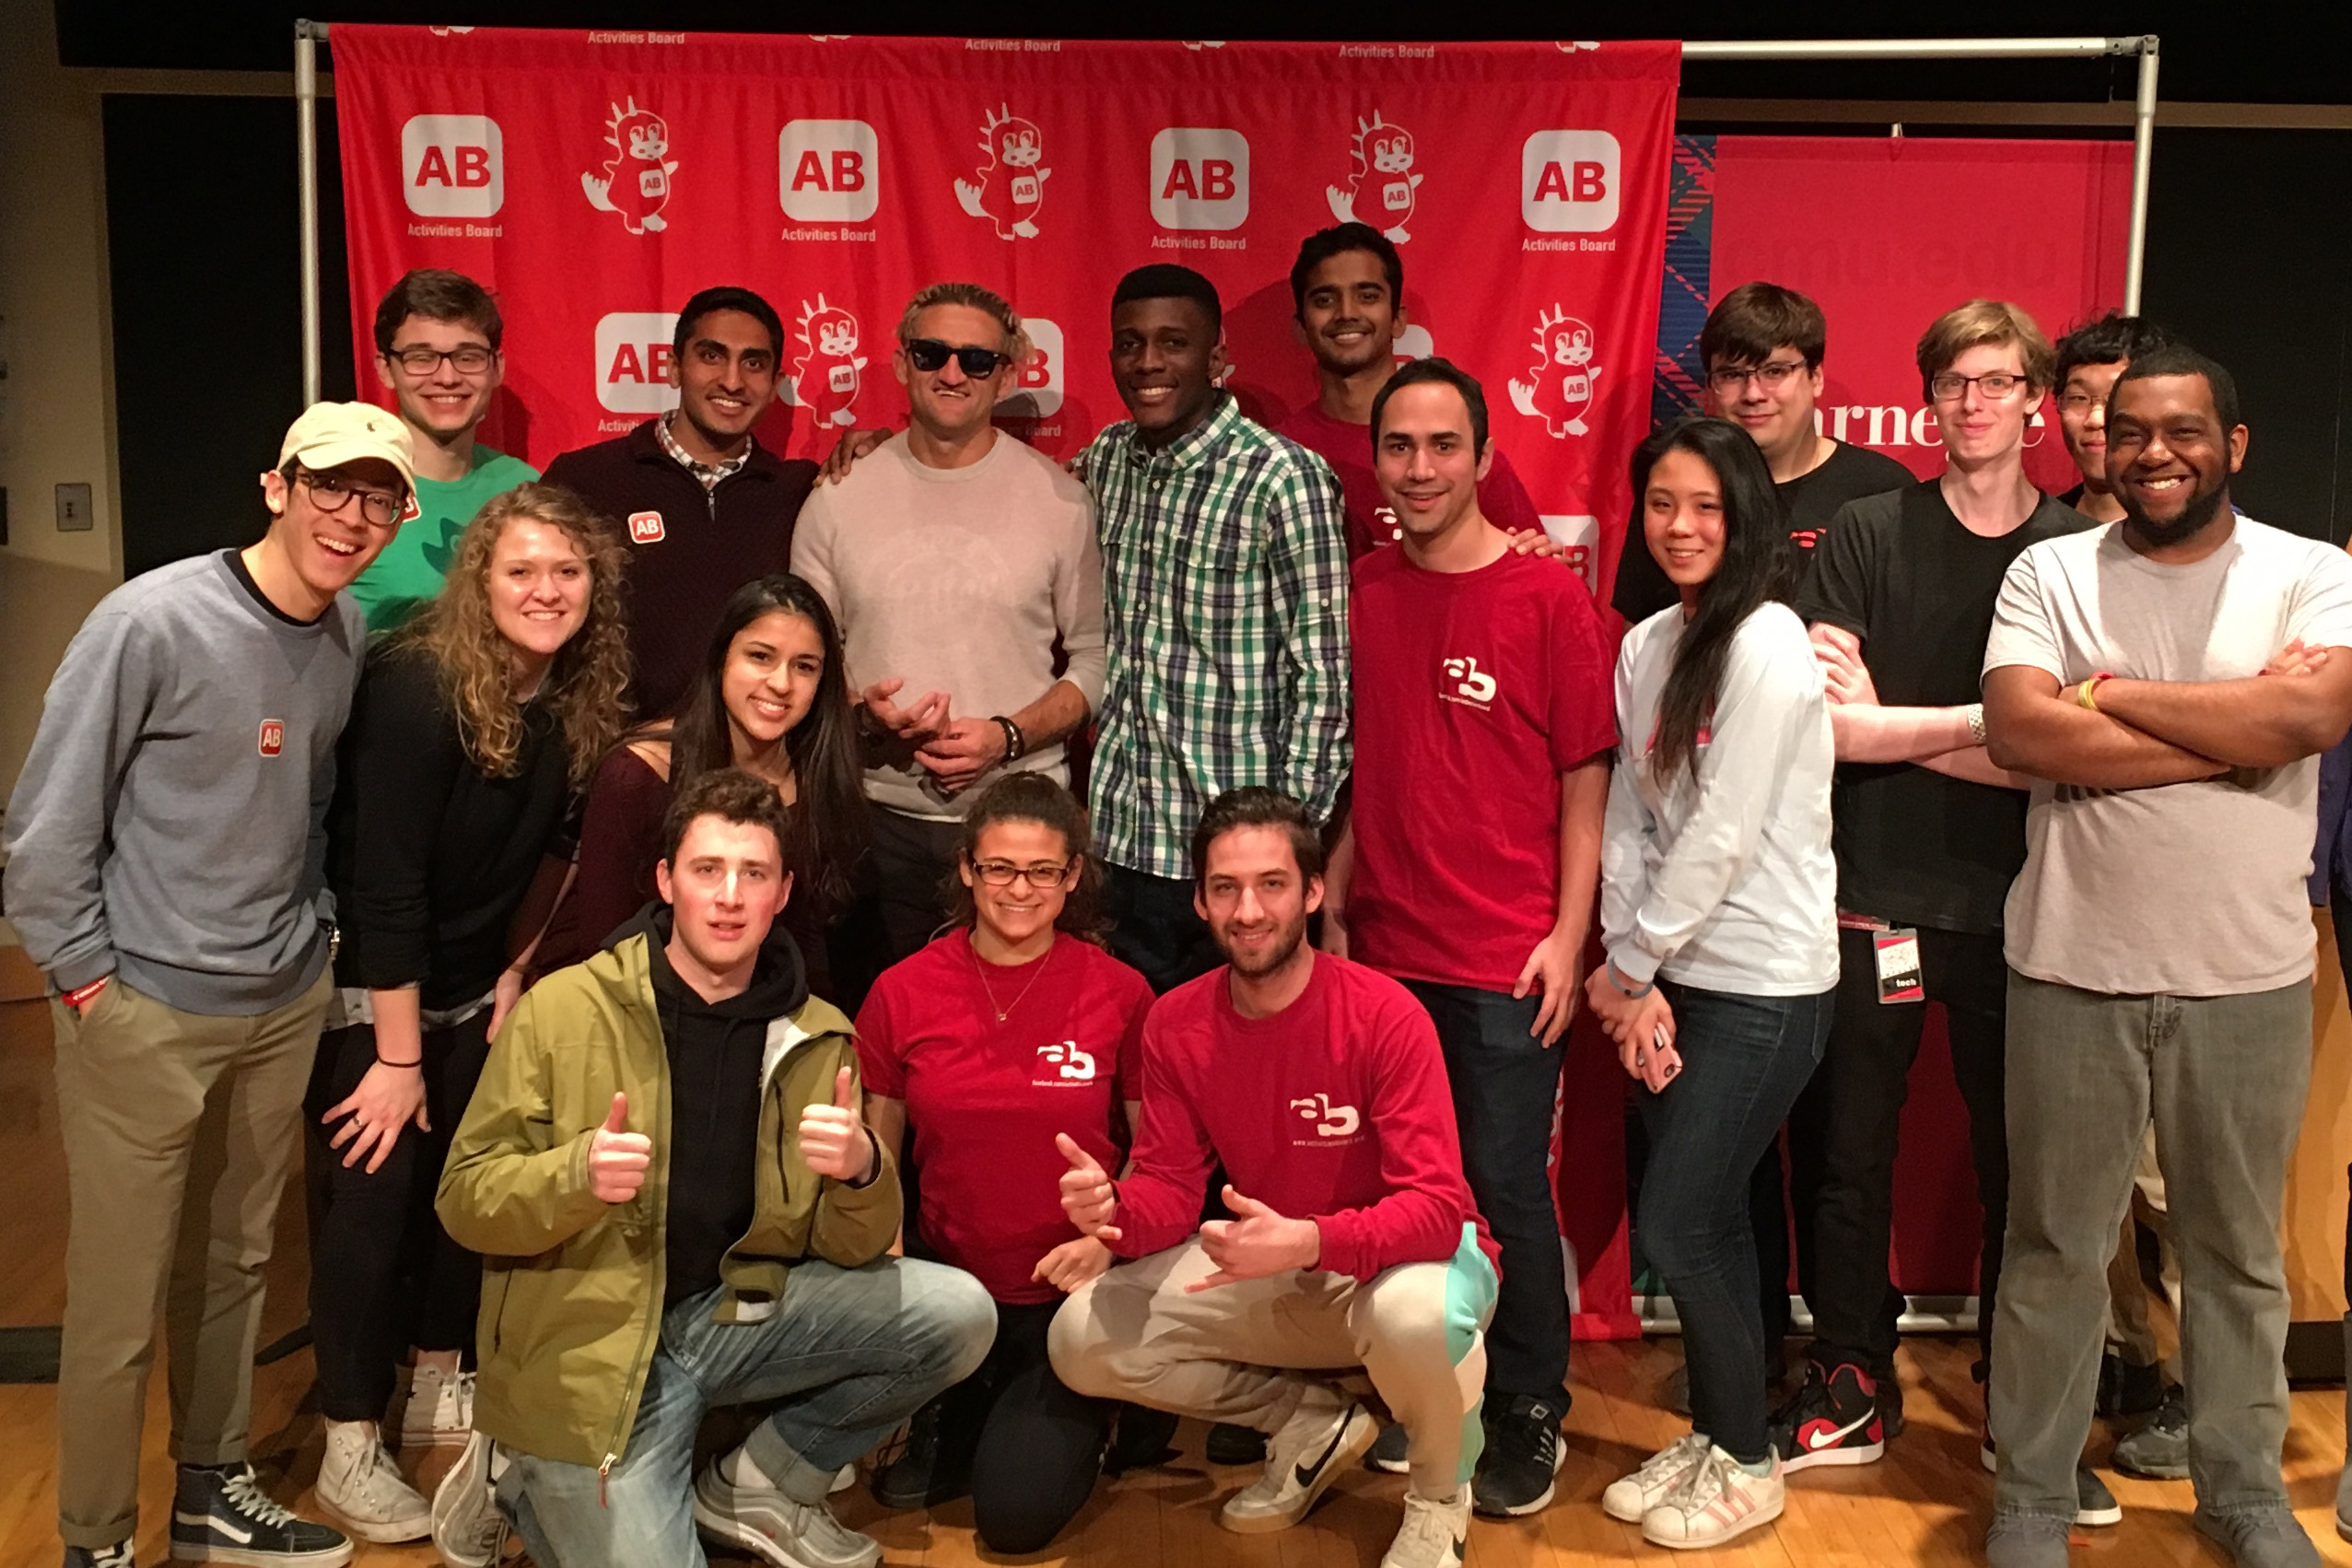 past and current ab members at a meet and greet with casey neistat, a famous youtuber